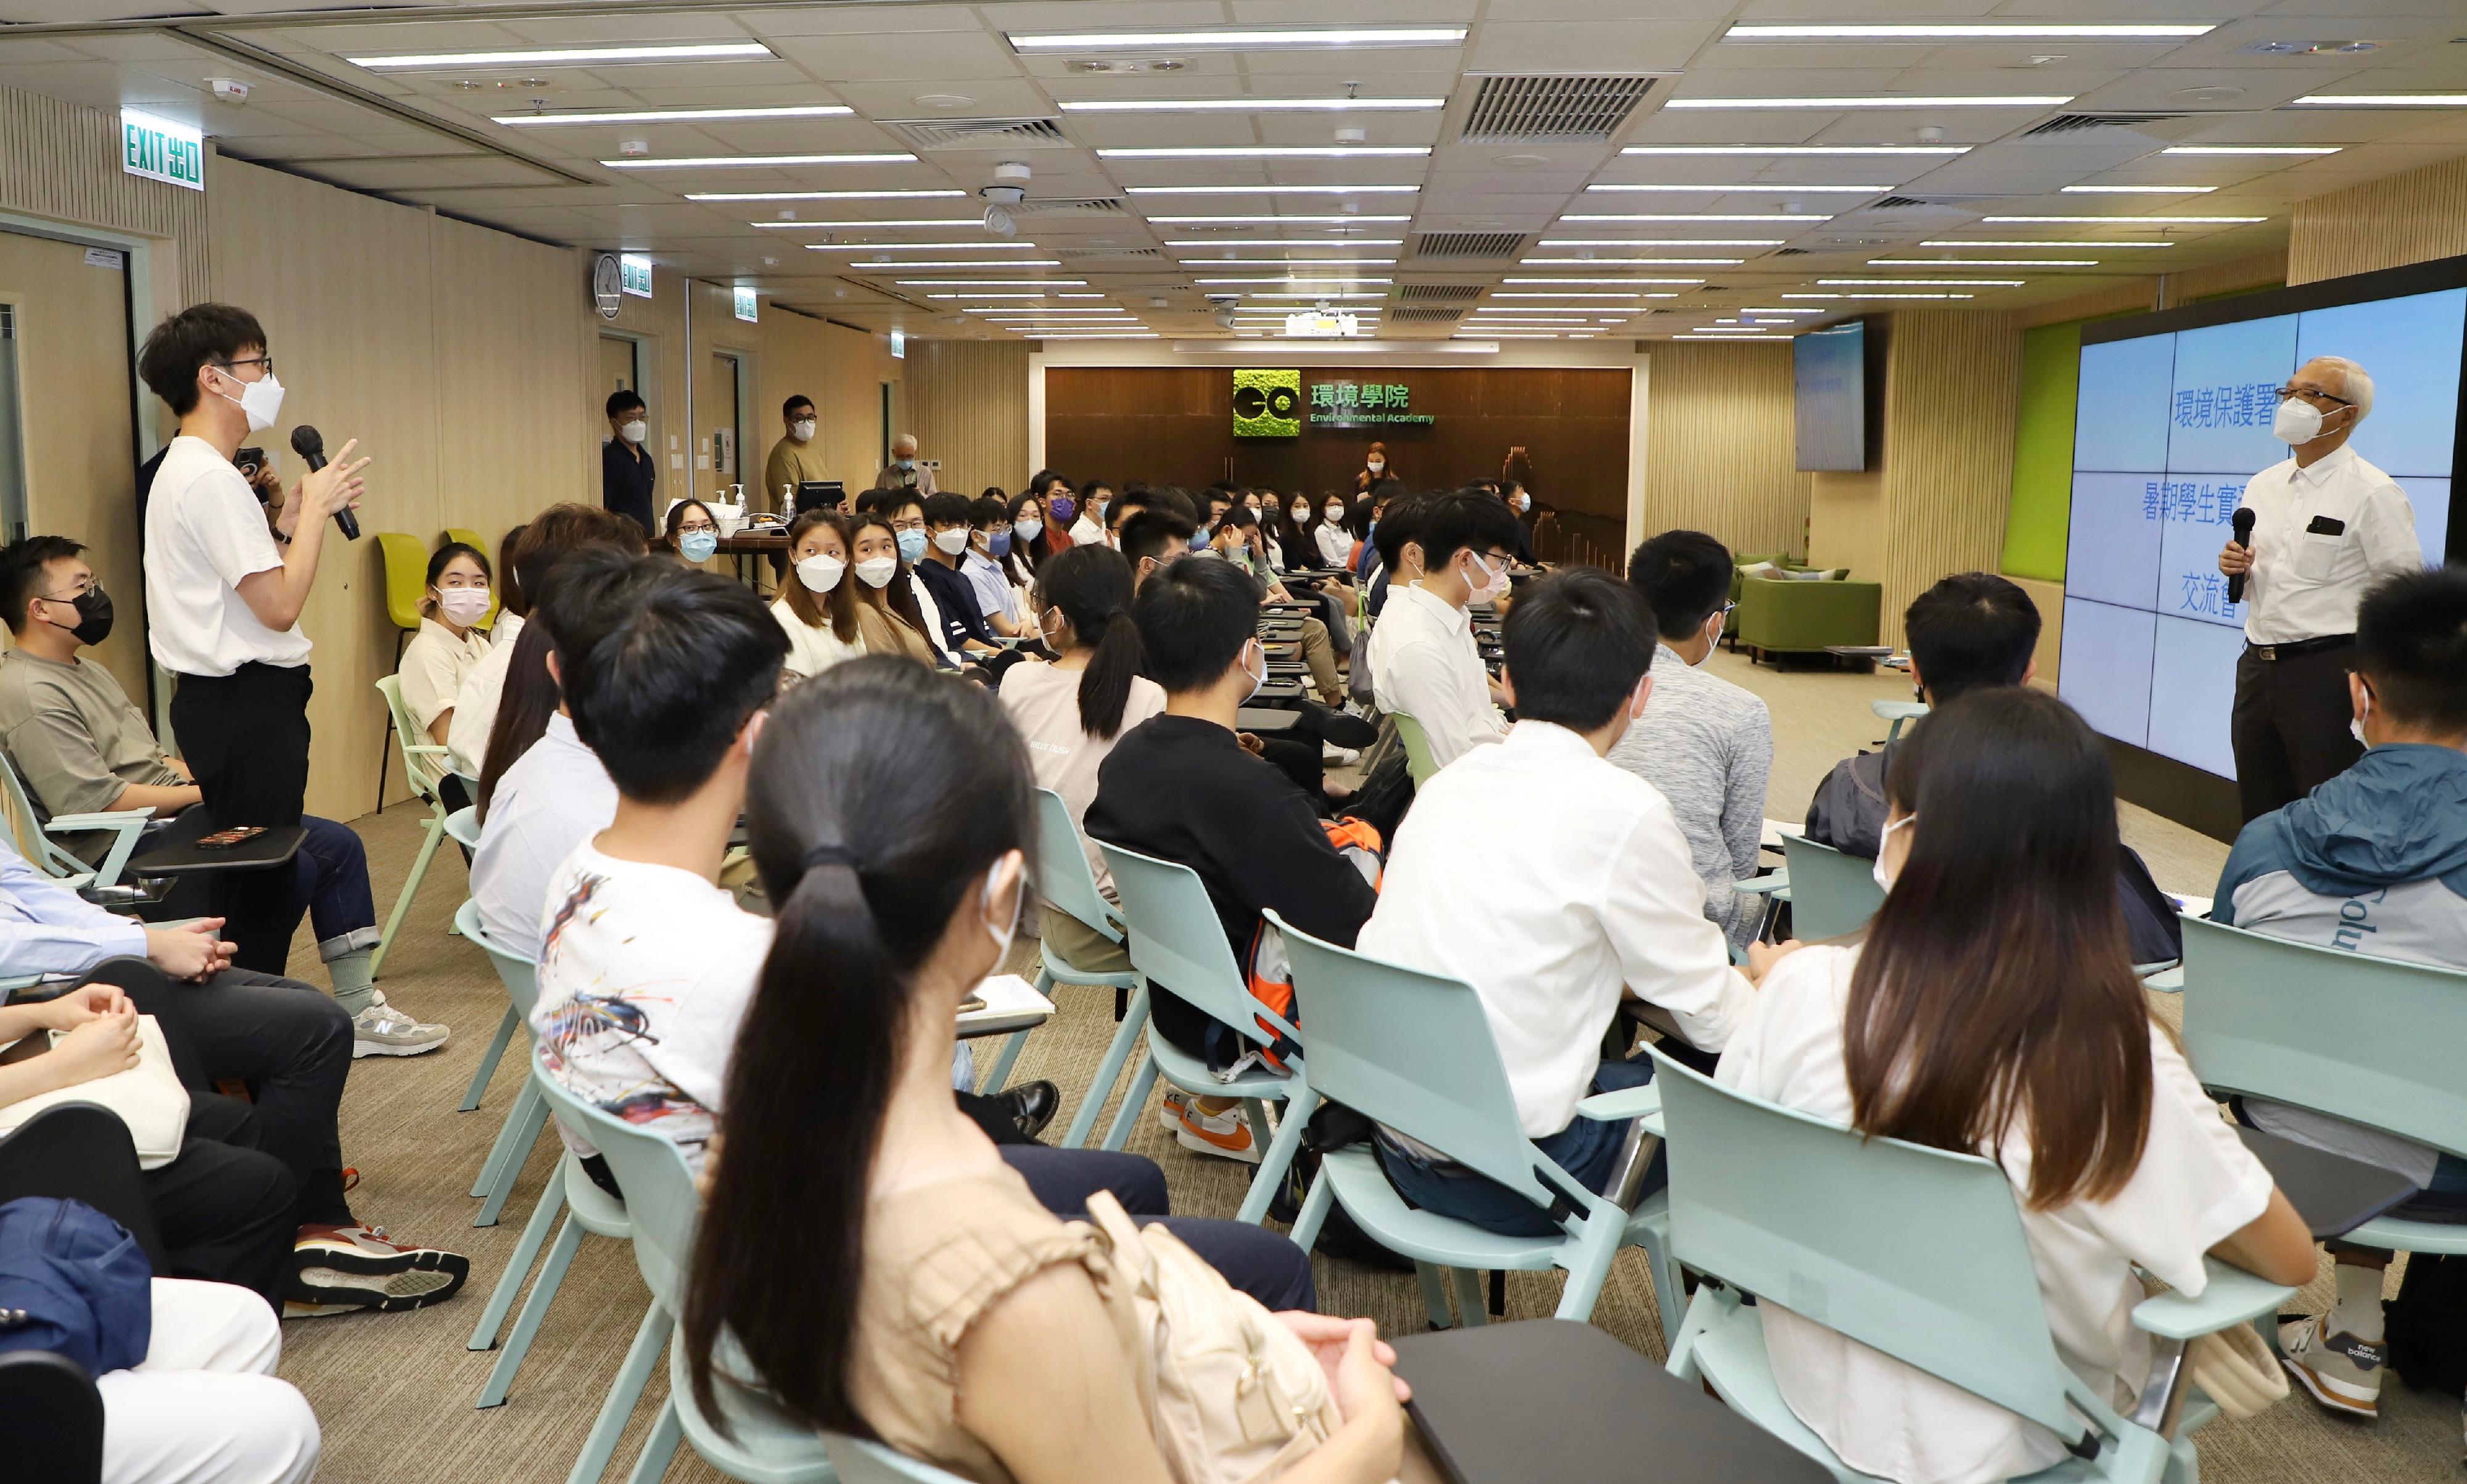 The Secretary for Environment and Ecology, Mr Tse Chin-wan, today (August 4) met with summer interns of the Post-secondary Student Summer Internship Programme at the Environmental Academy of the Environmental Protection Department. He listened to interns describing their work duties, on-the-job training and other experiences of the internship, and also exchanged views with them.

